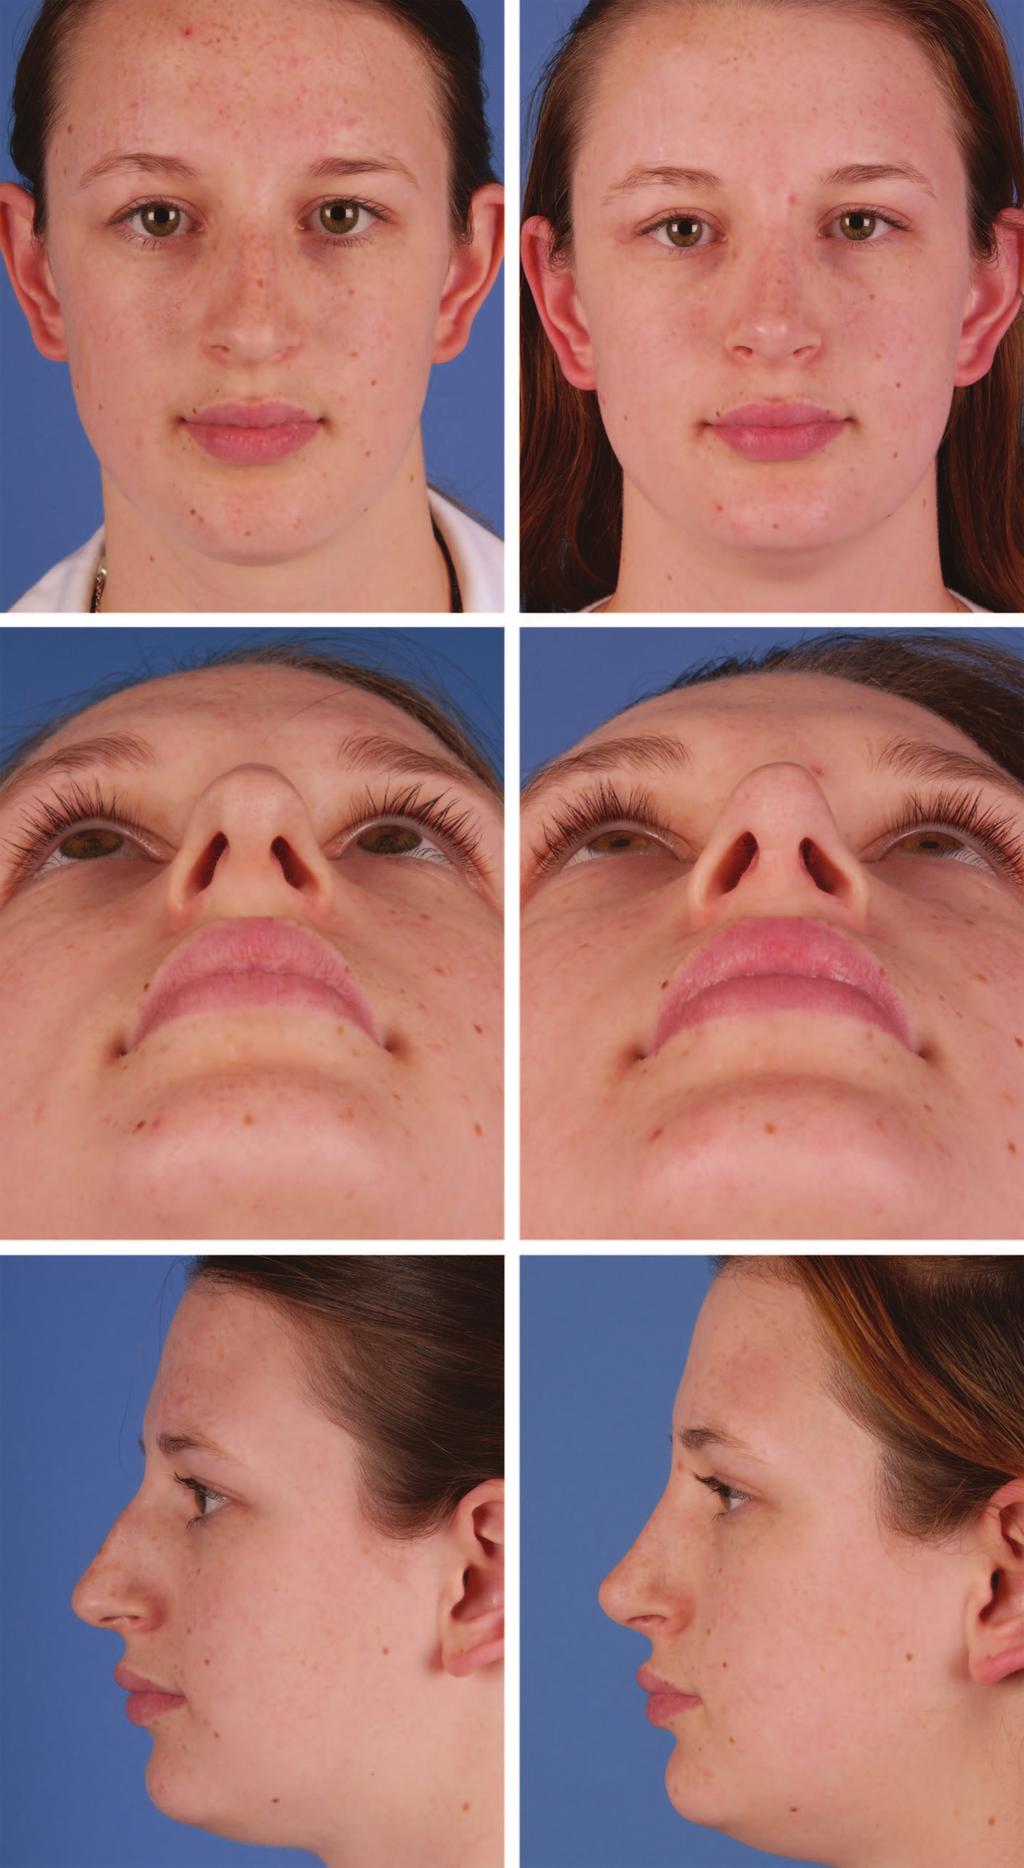 Plastic and Reconstructive Surgery October 2012 Fig. 5. Case 2: tension nose.